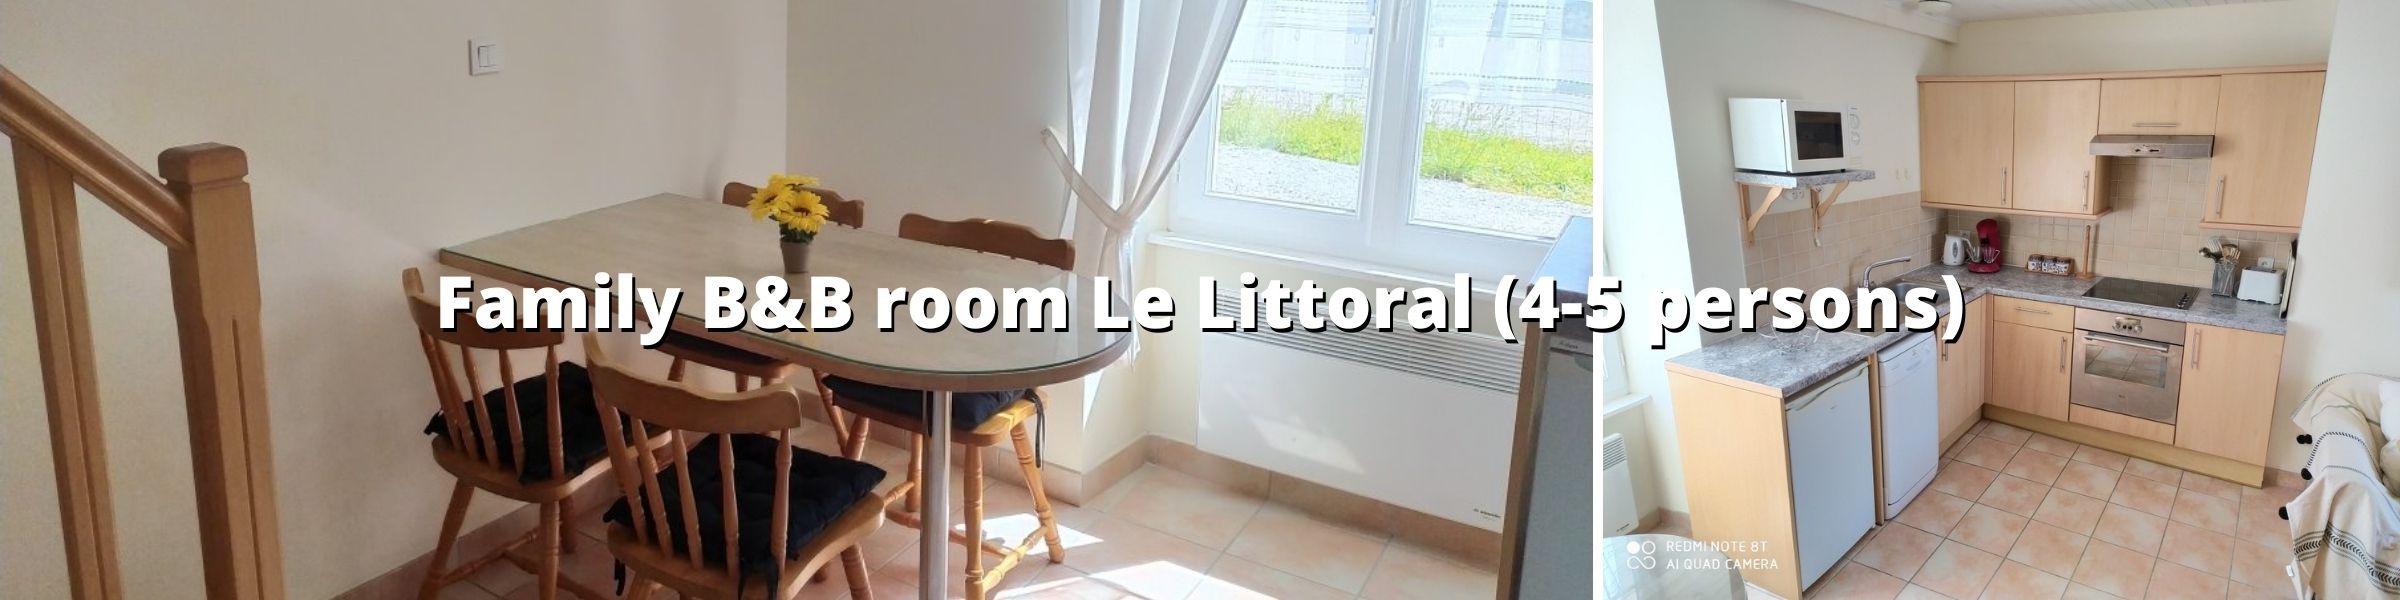 Family B&B room Le Littoral (4-5 persons)